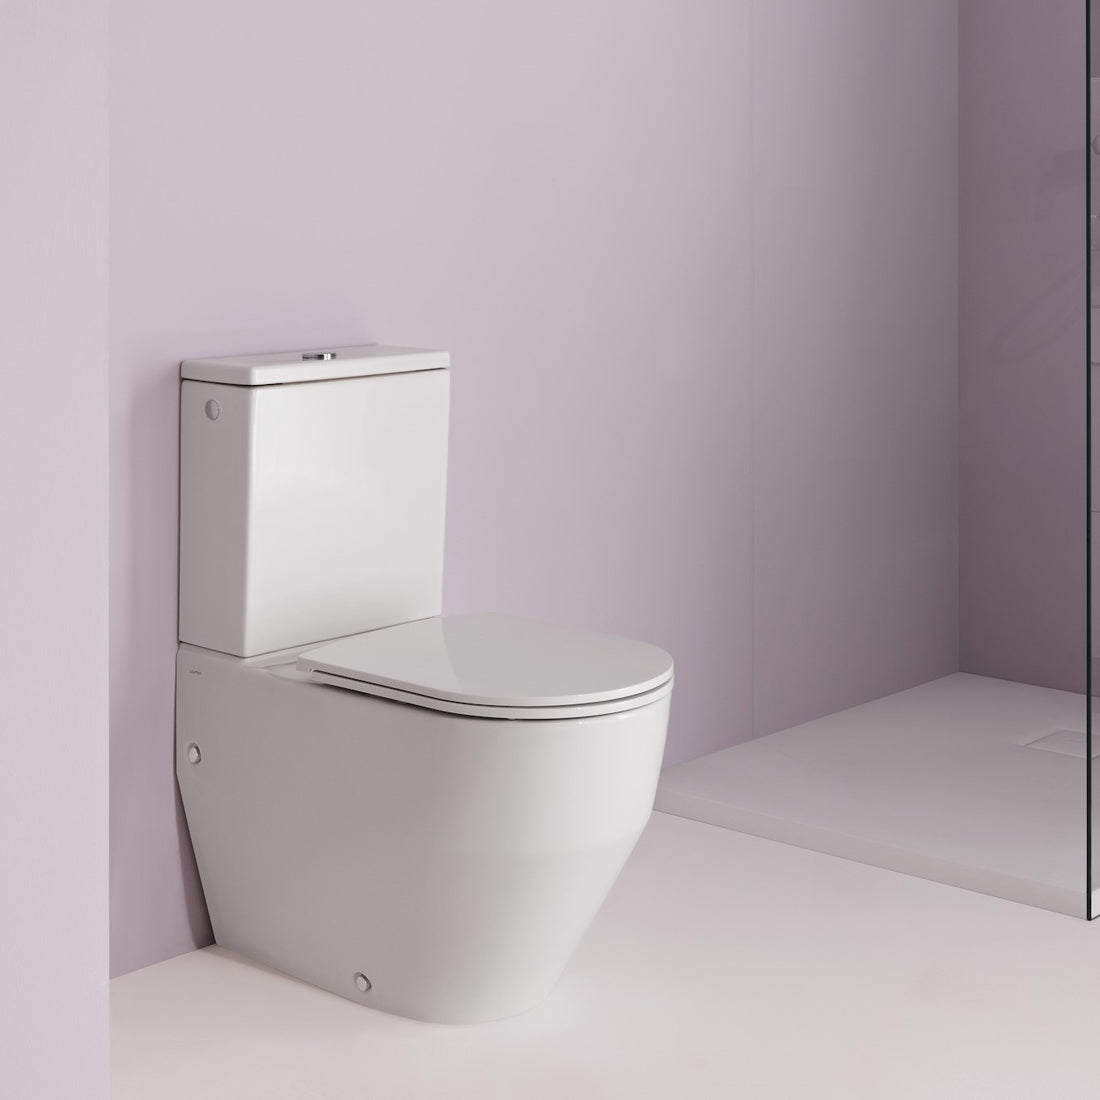 Laufen Pro Rimless Close-coupled Back-to-wall WC